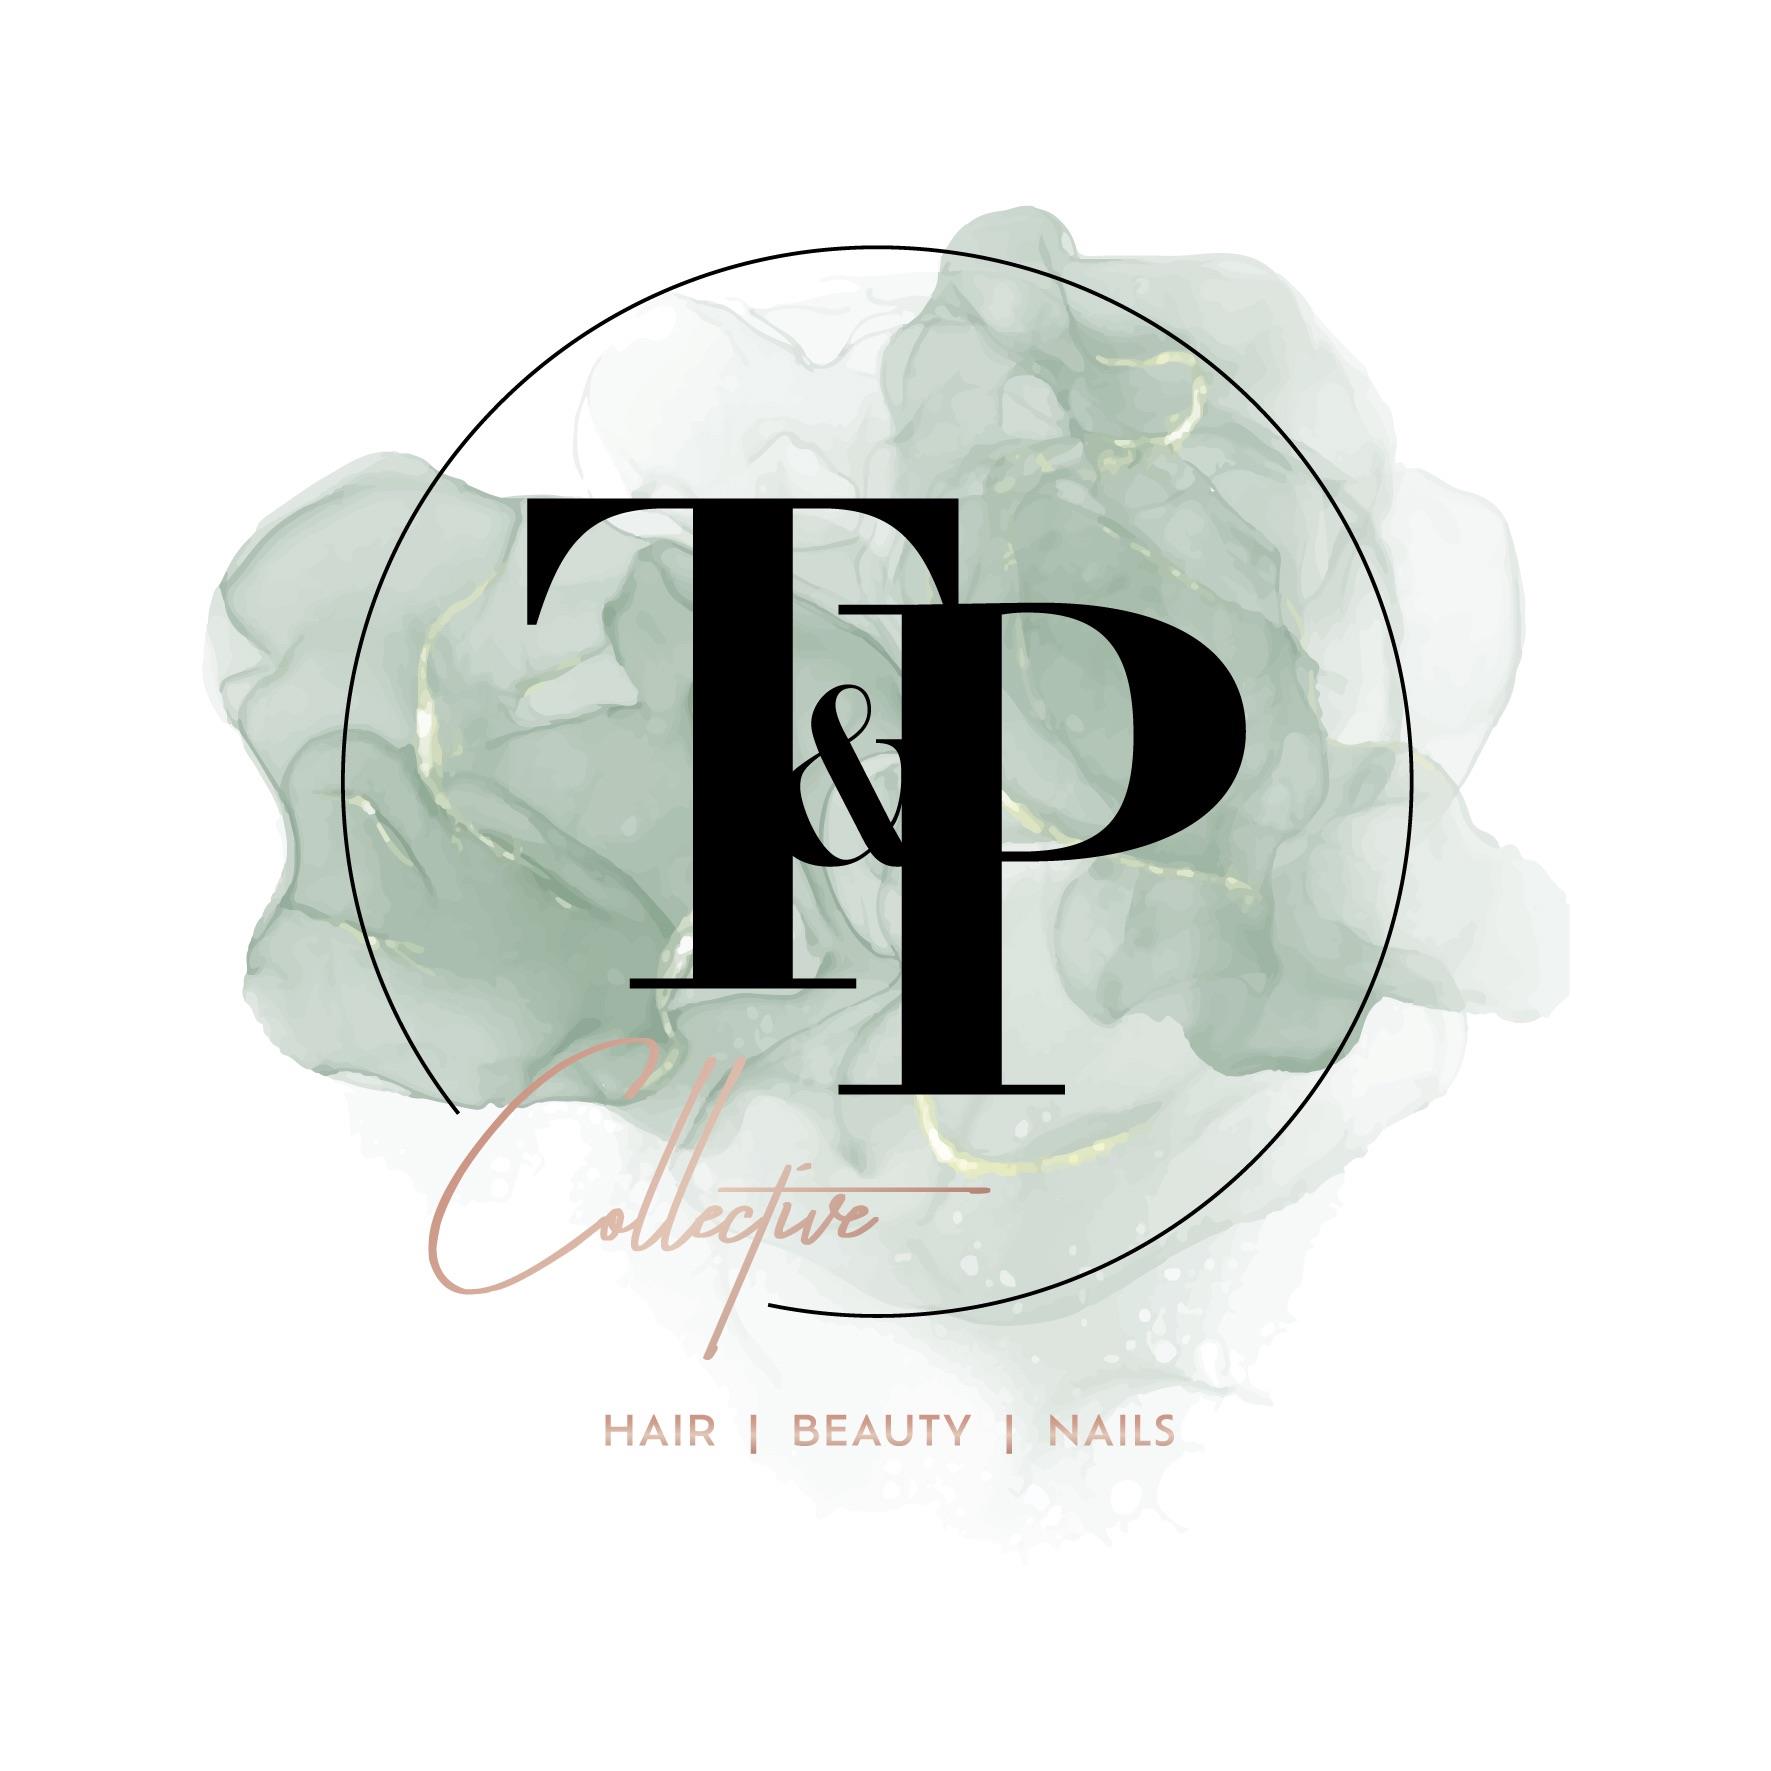 T&P Collective Beauty 